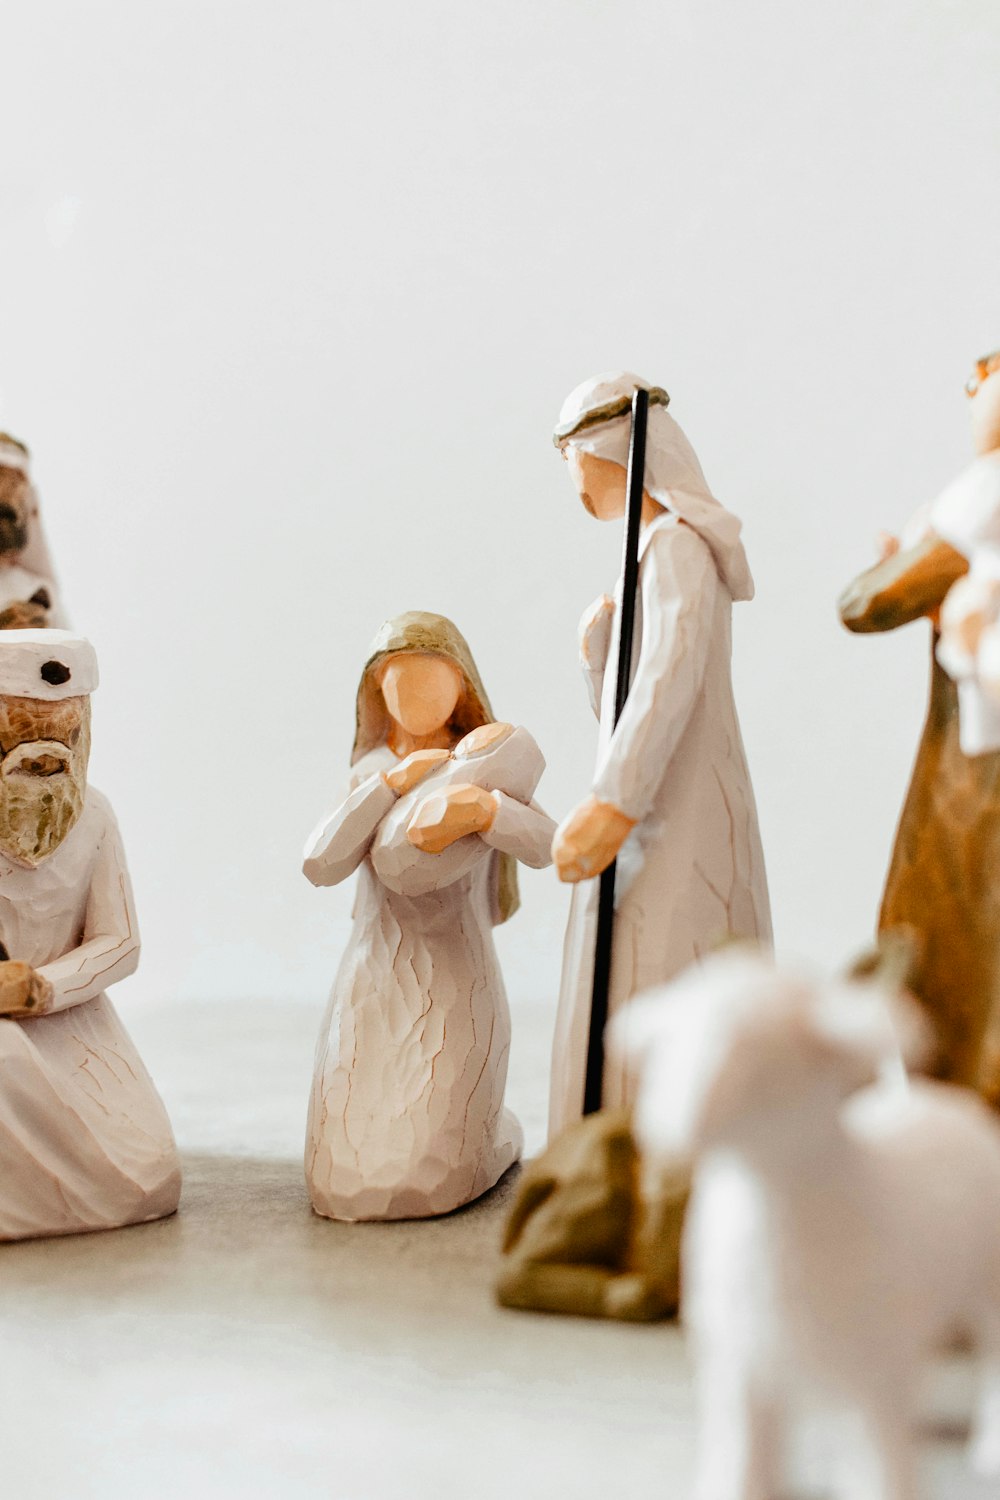 a group of figurines of people holding a baby jesus